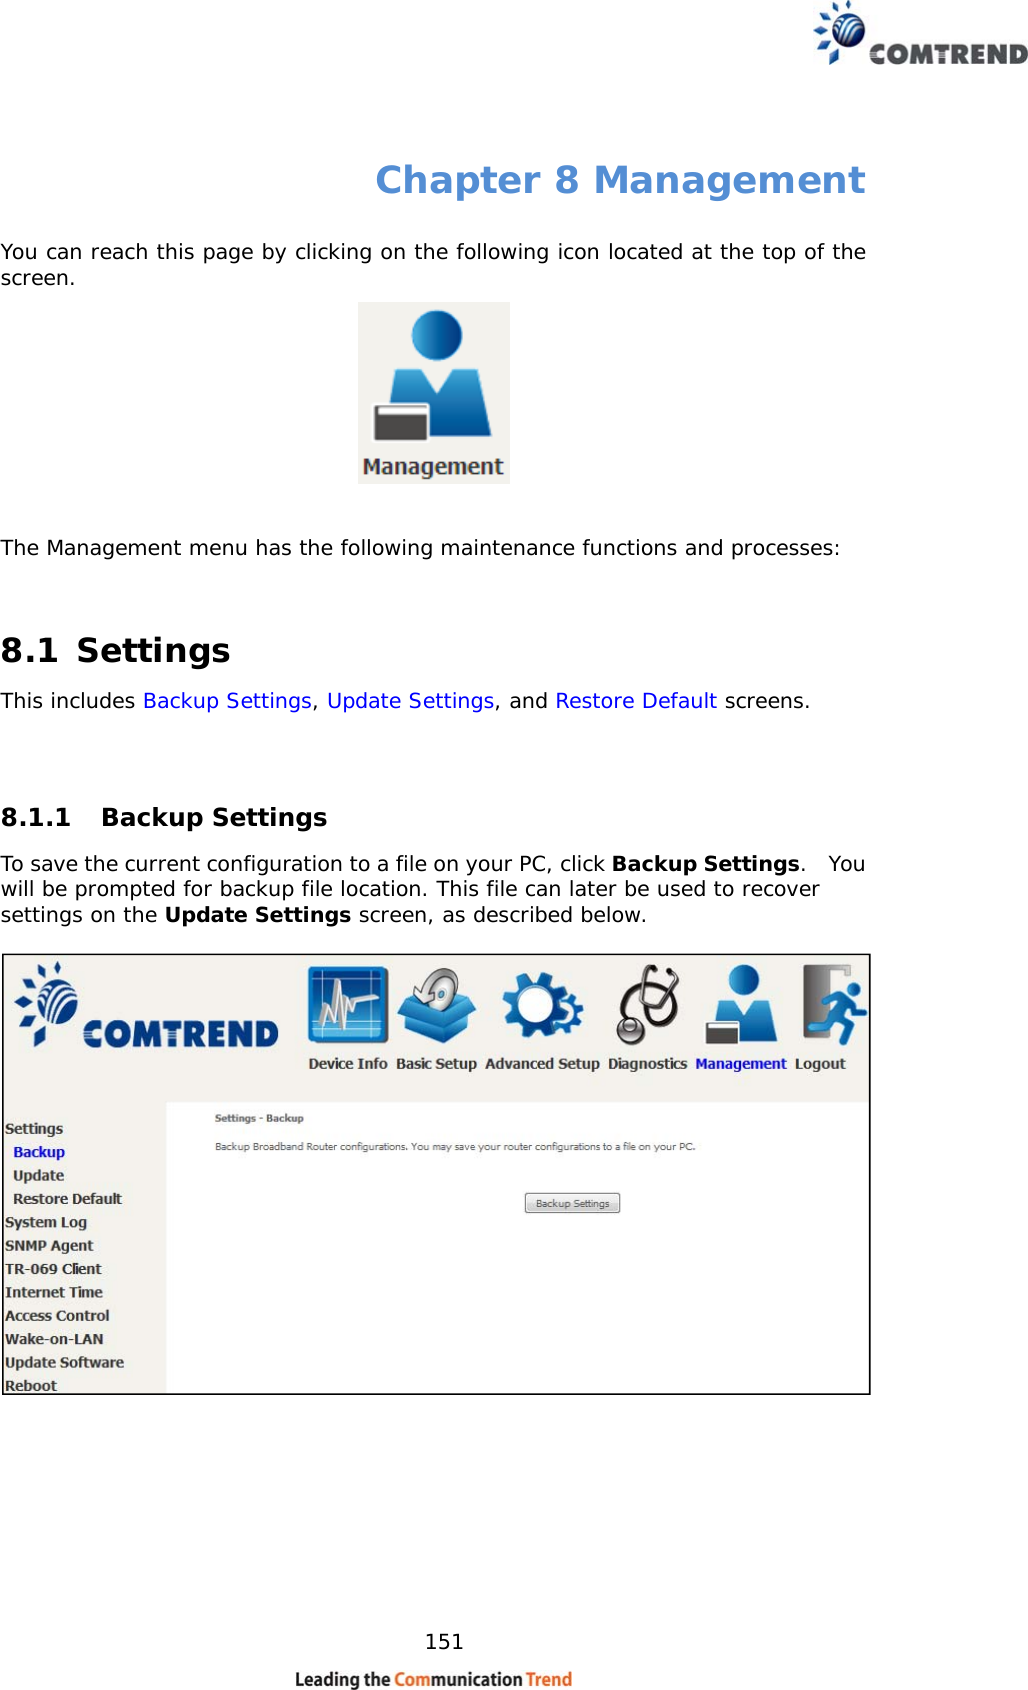    151 Chapter 8 Management You can reach this page by clicking on the following icon located at the top of the screen.    The Management menu has the following maintenance functions and processes:   8.1 Settings This includes Backup Settings, Update Settings, and Restore Default screens.   8.1.1 Backup Settings  To save the current configuration to a file on your PC, click Backup Settings.  You will be prompted for backup file location. This file can later be used to recover settings on the Update Settings screen, as described below.    